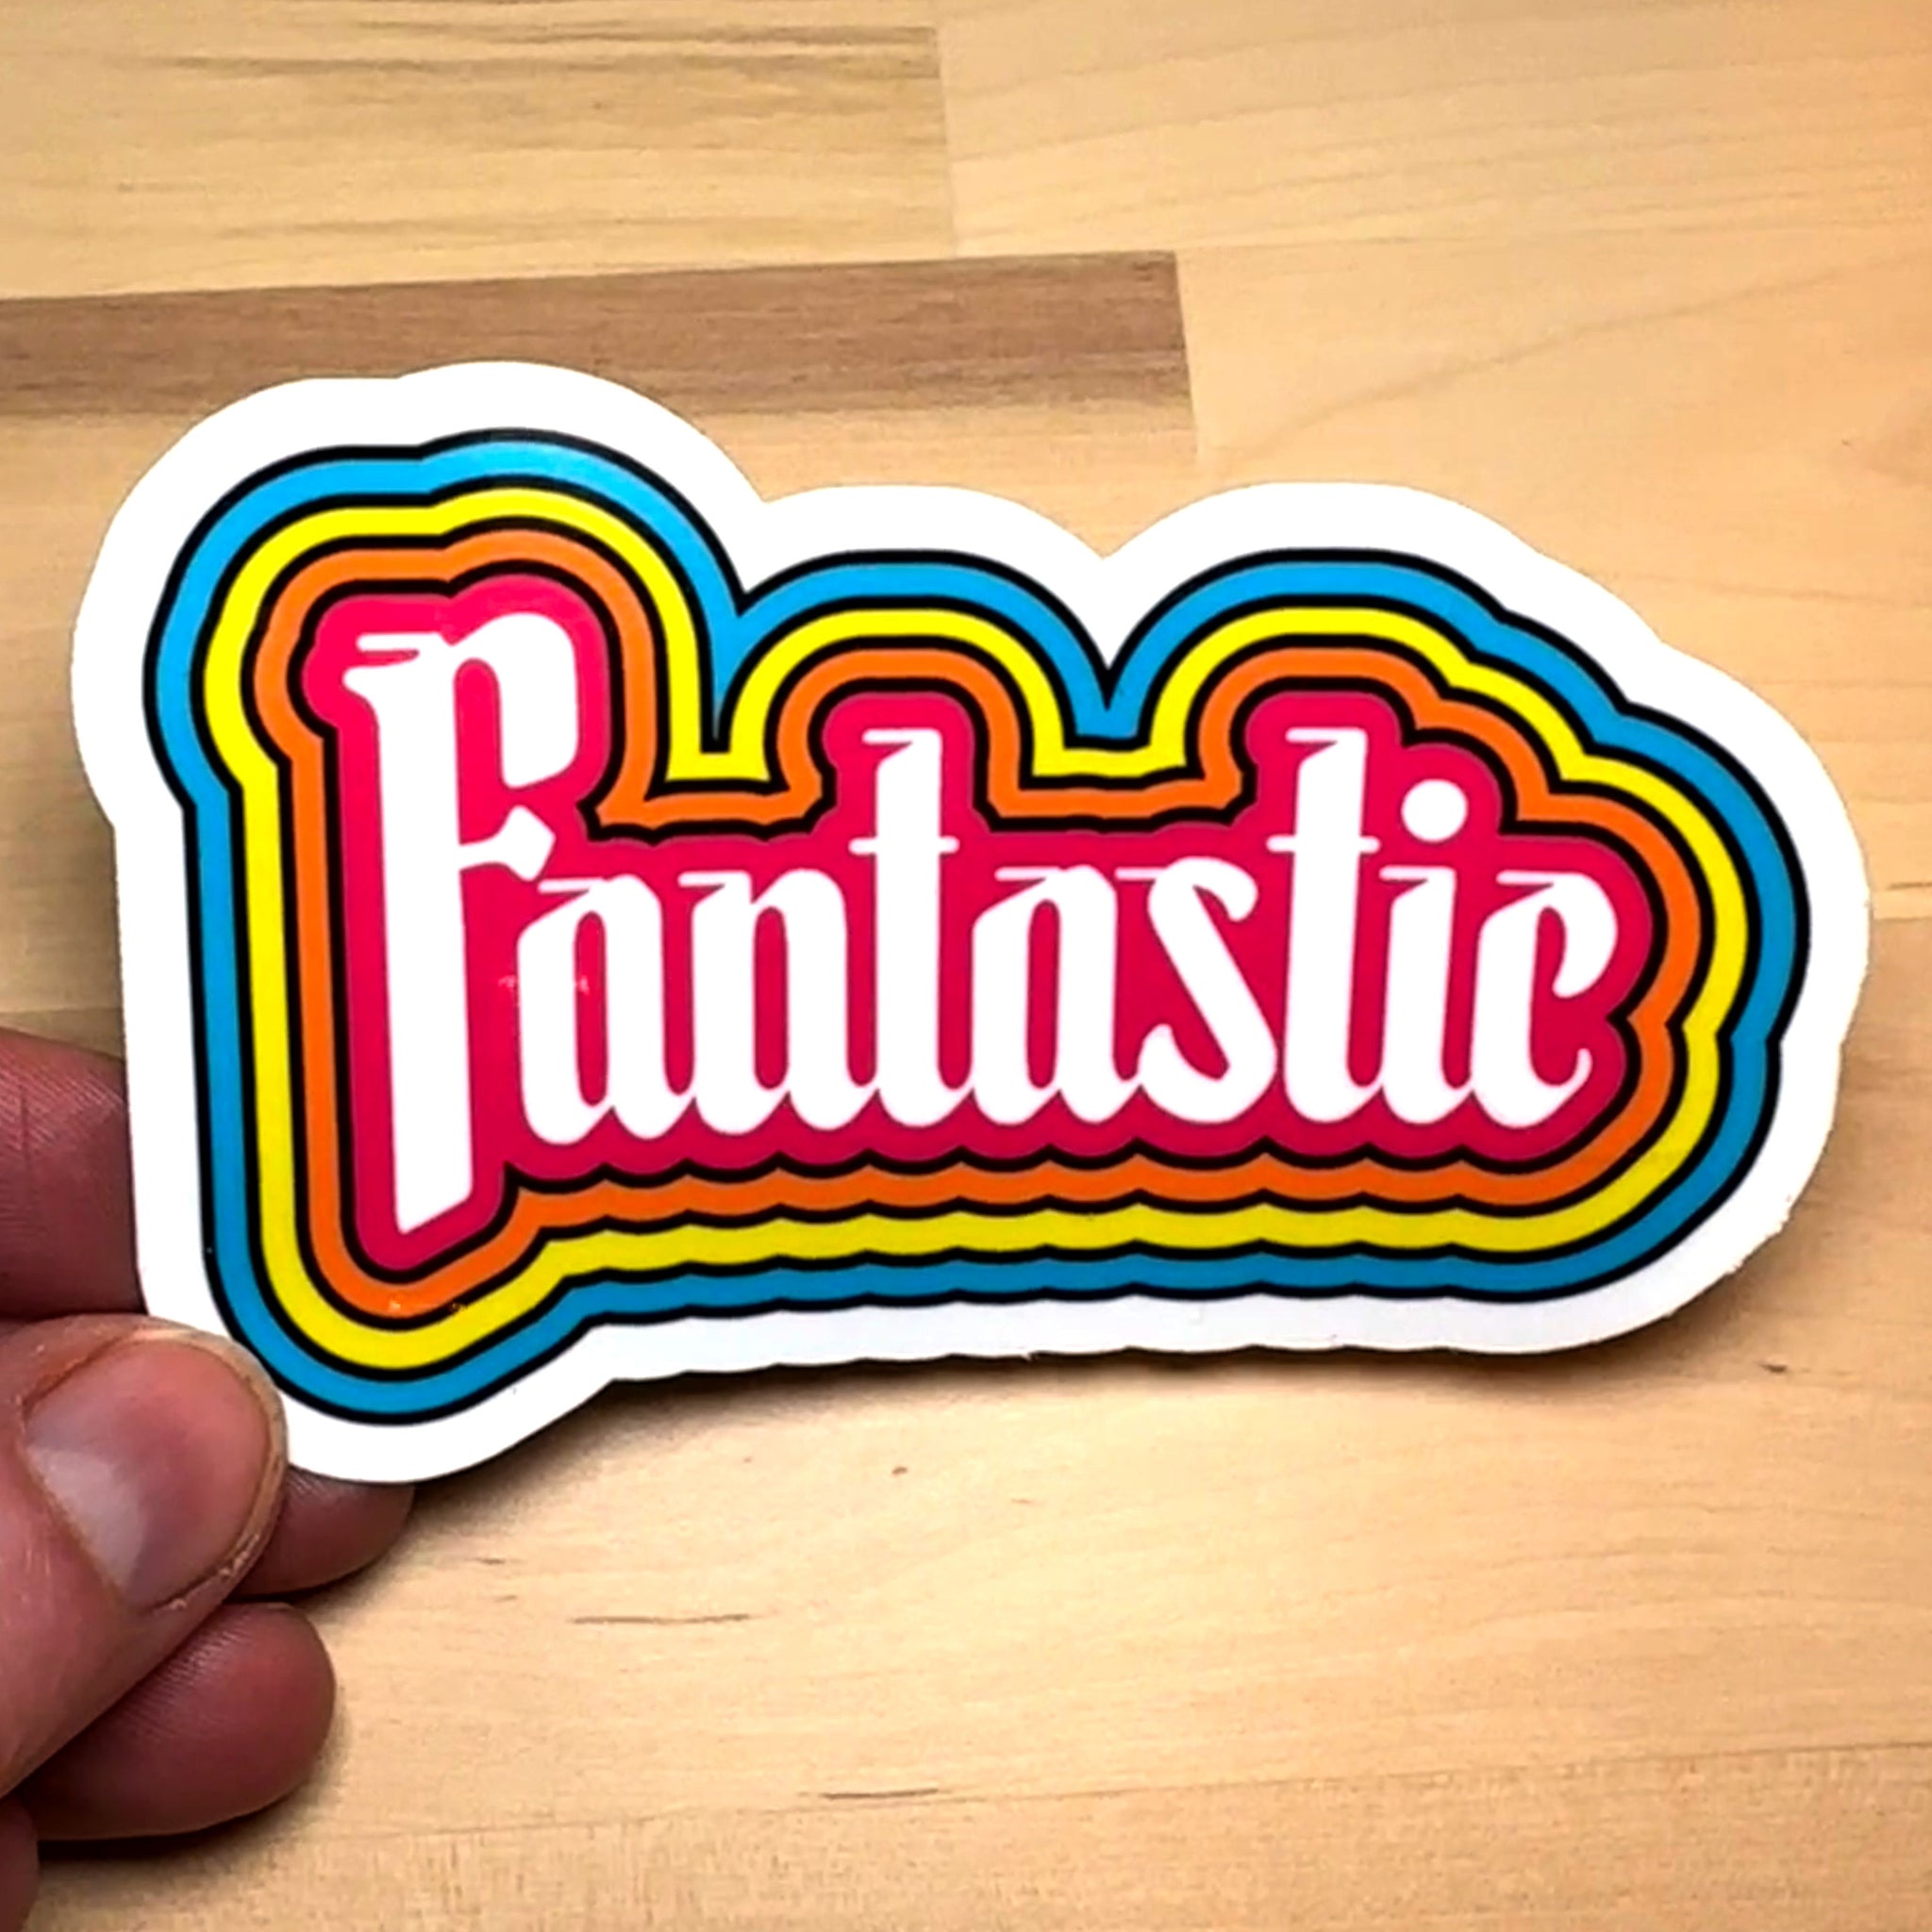 photo of a waterproof sticker that features the word "Fantastic!" with outlines of pink, orange, yellow and blue